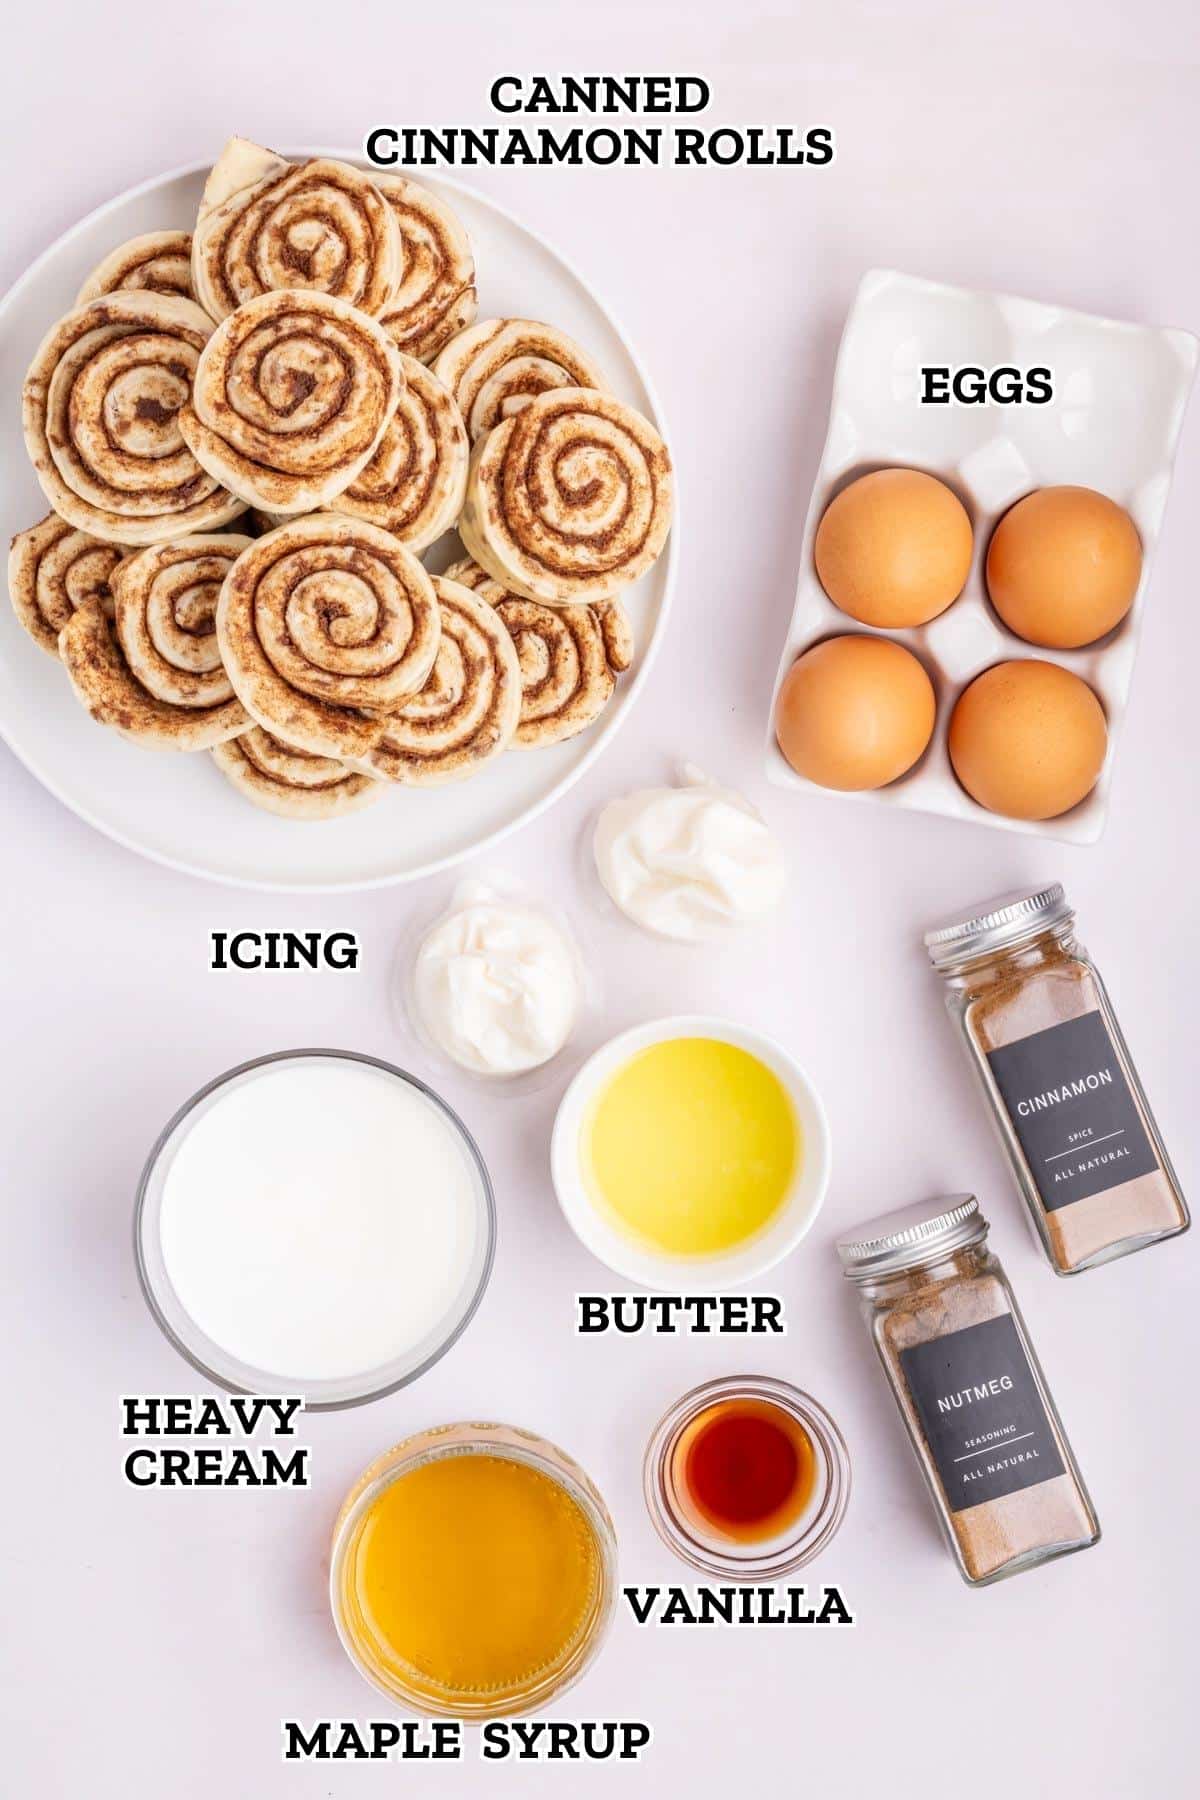 A labeled image of ingredients for cinnamon roll casserole.